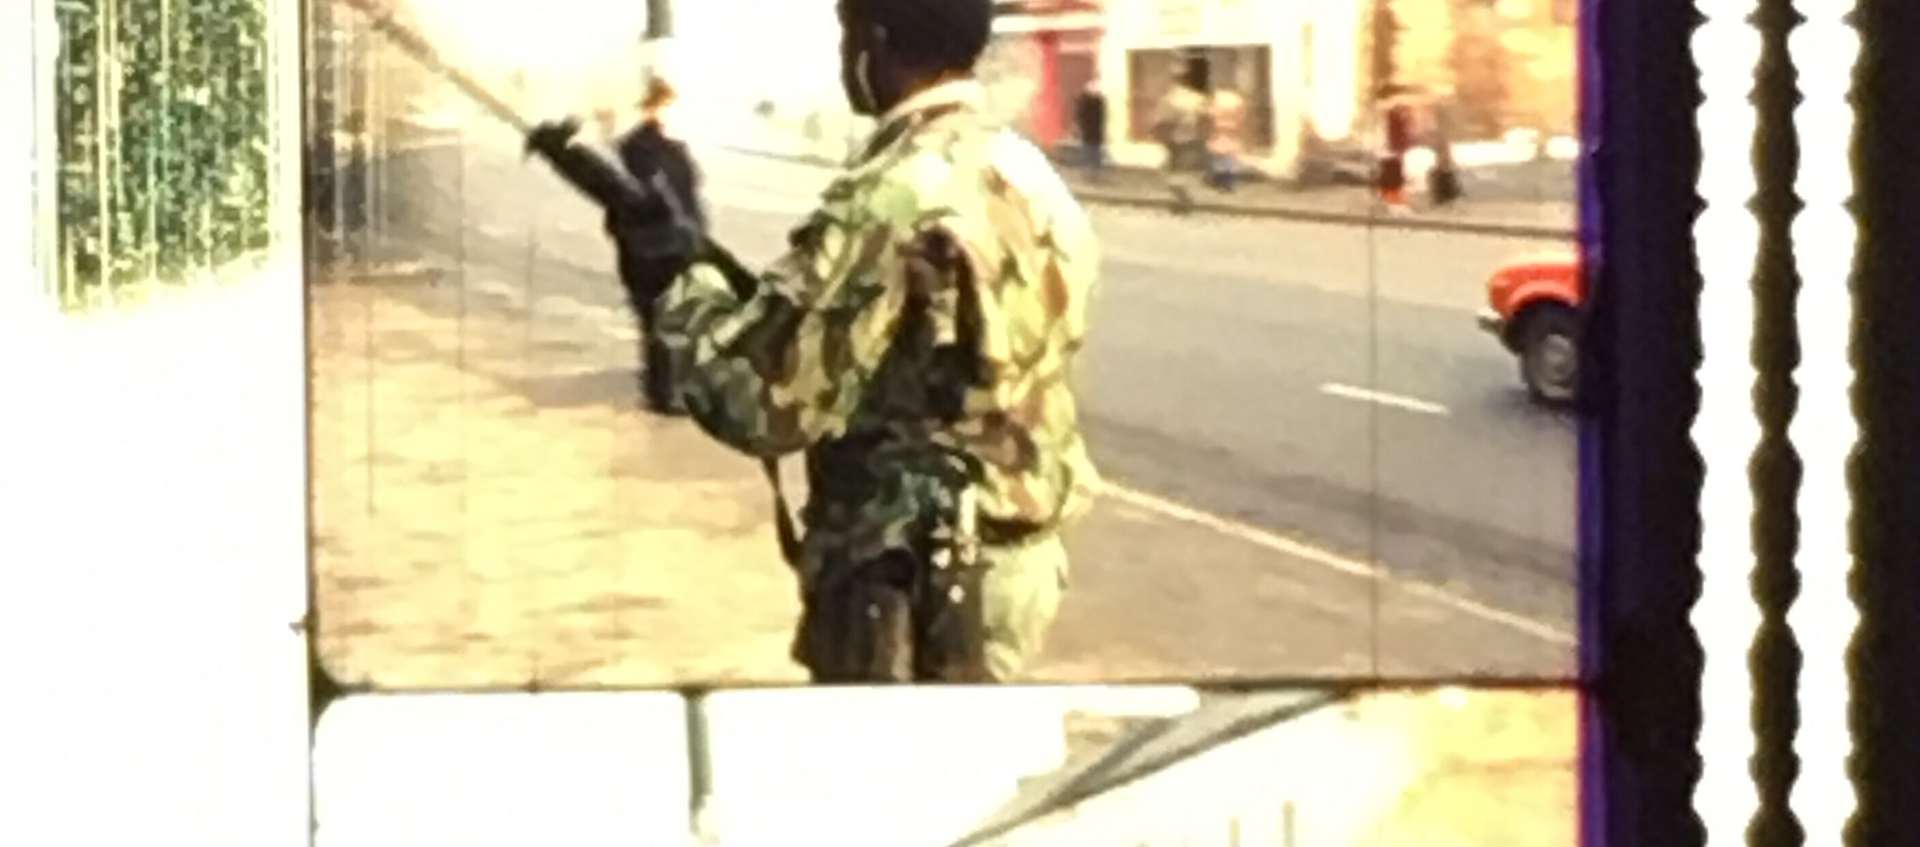 A strip of frame enlargements from a film print. The image shows a Black man from behind who is dressed in military fatigues. He is holding a rifle and standing in a city street.